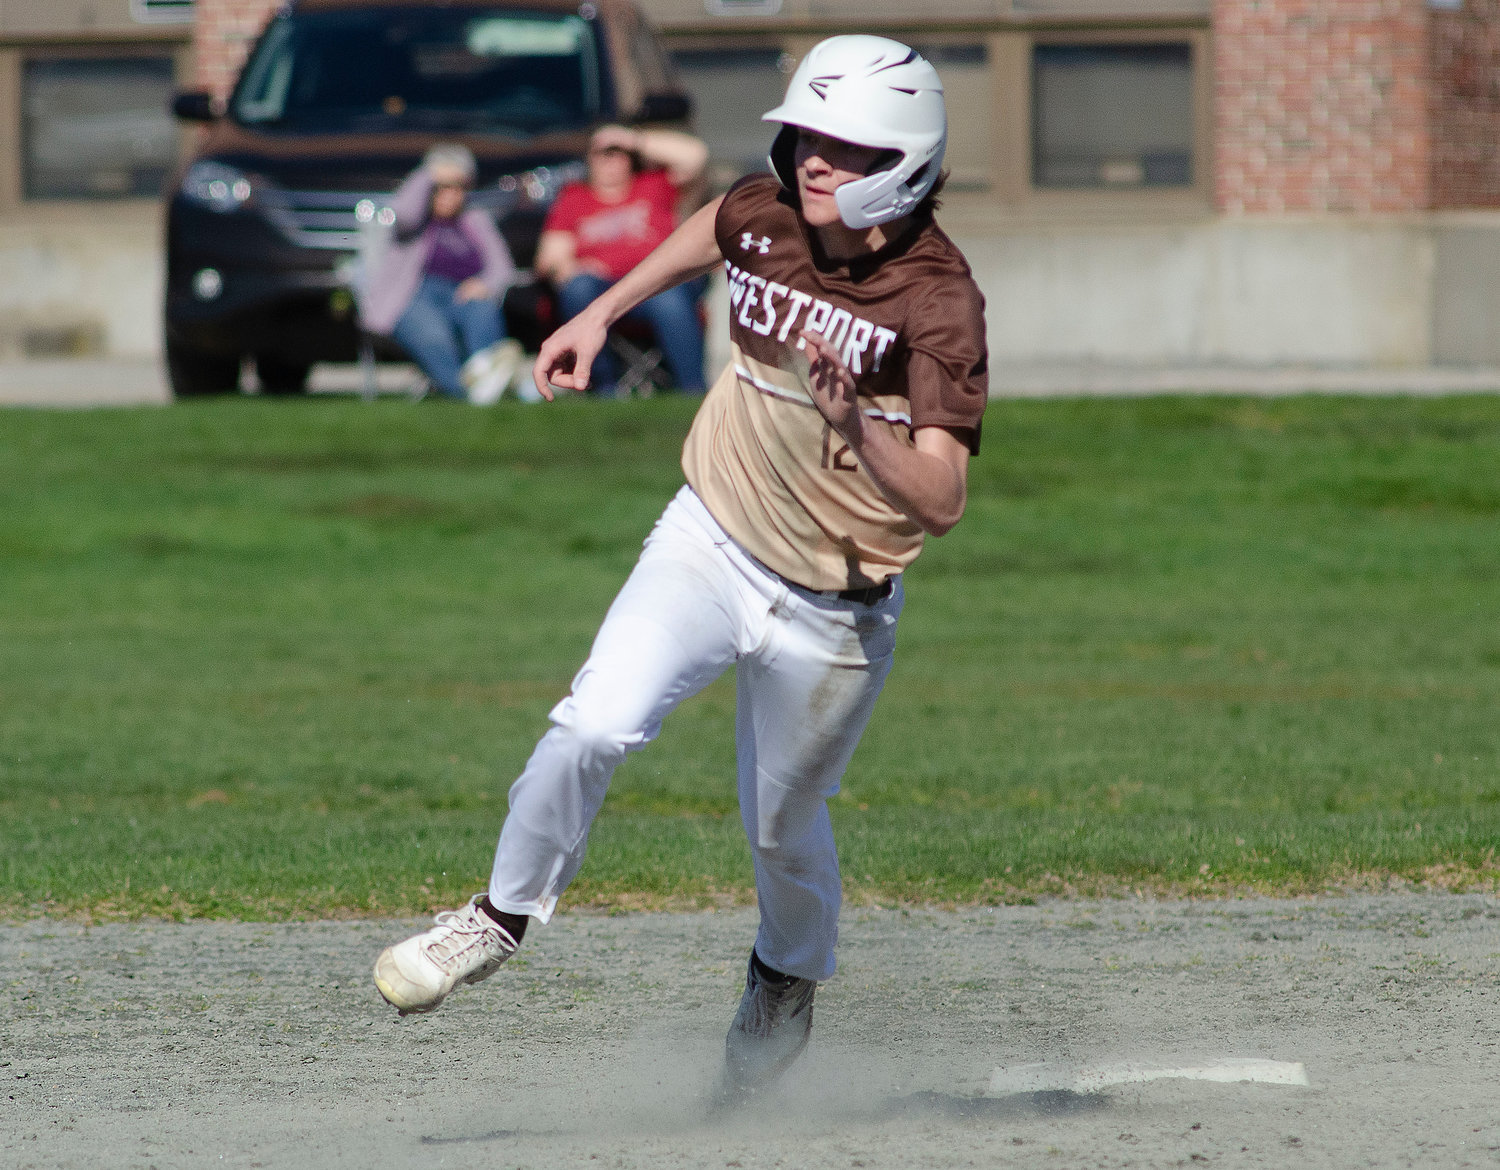 Cam Leary rounds second base and heads for third on Ben Boudria’s double in the second inning. Leary scored on the play.